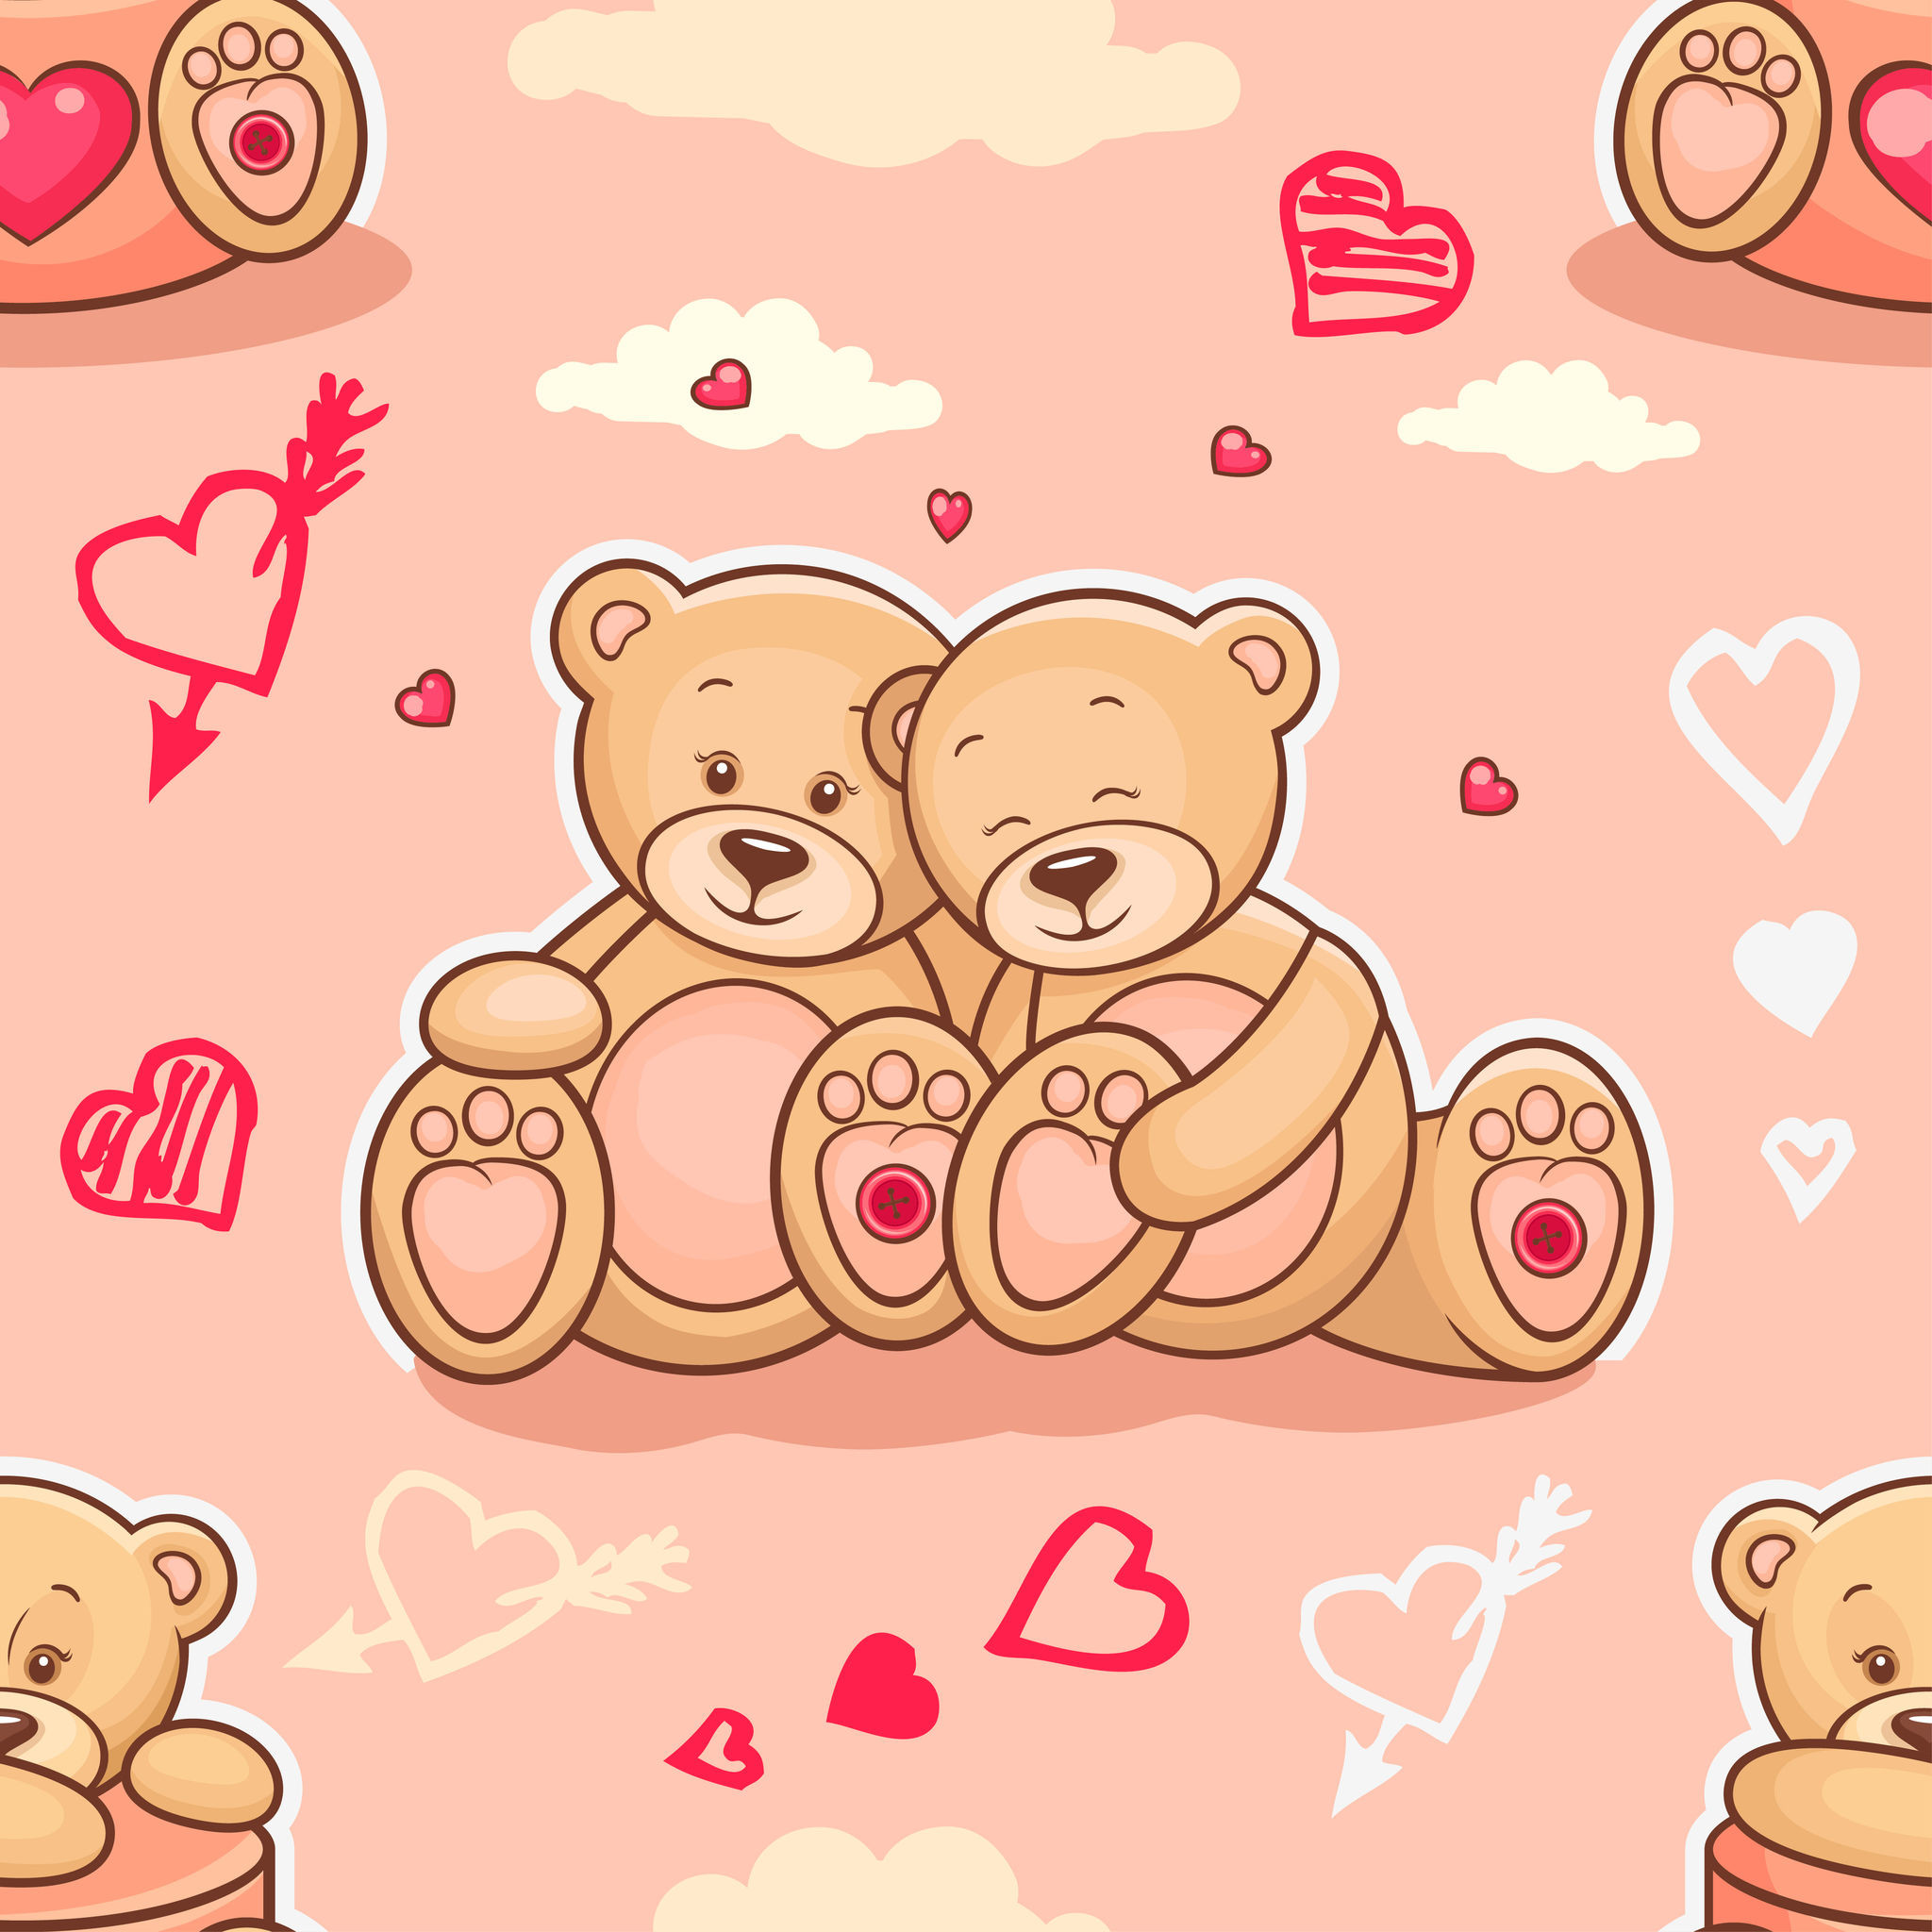 #Teddy #bear #best #friend #love #childhood #wallpapers #android